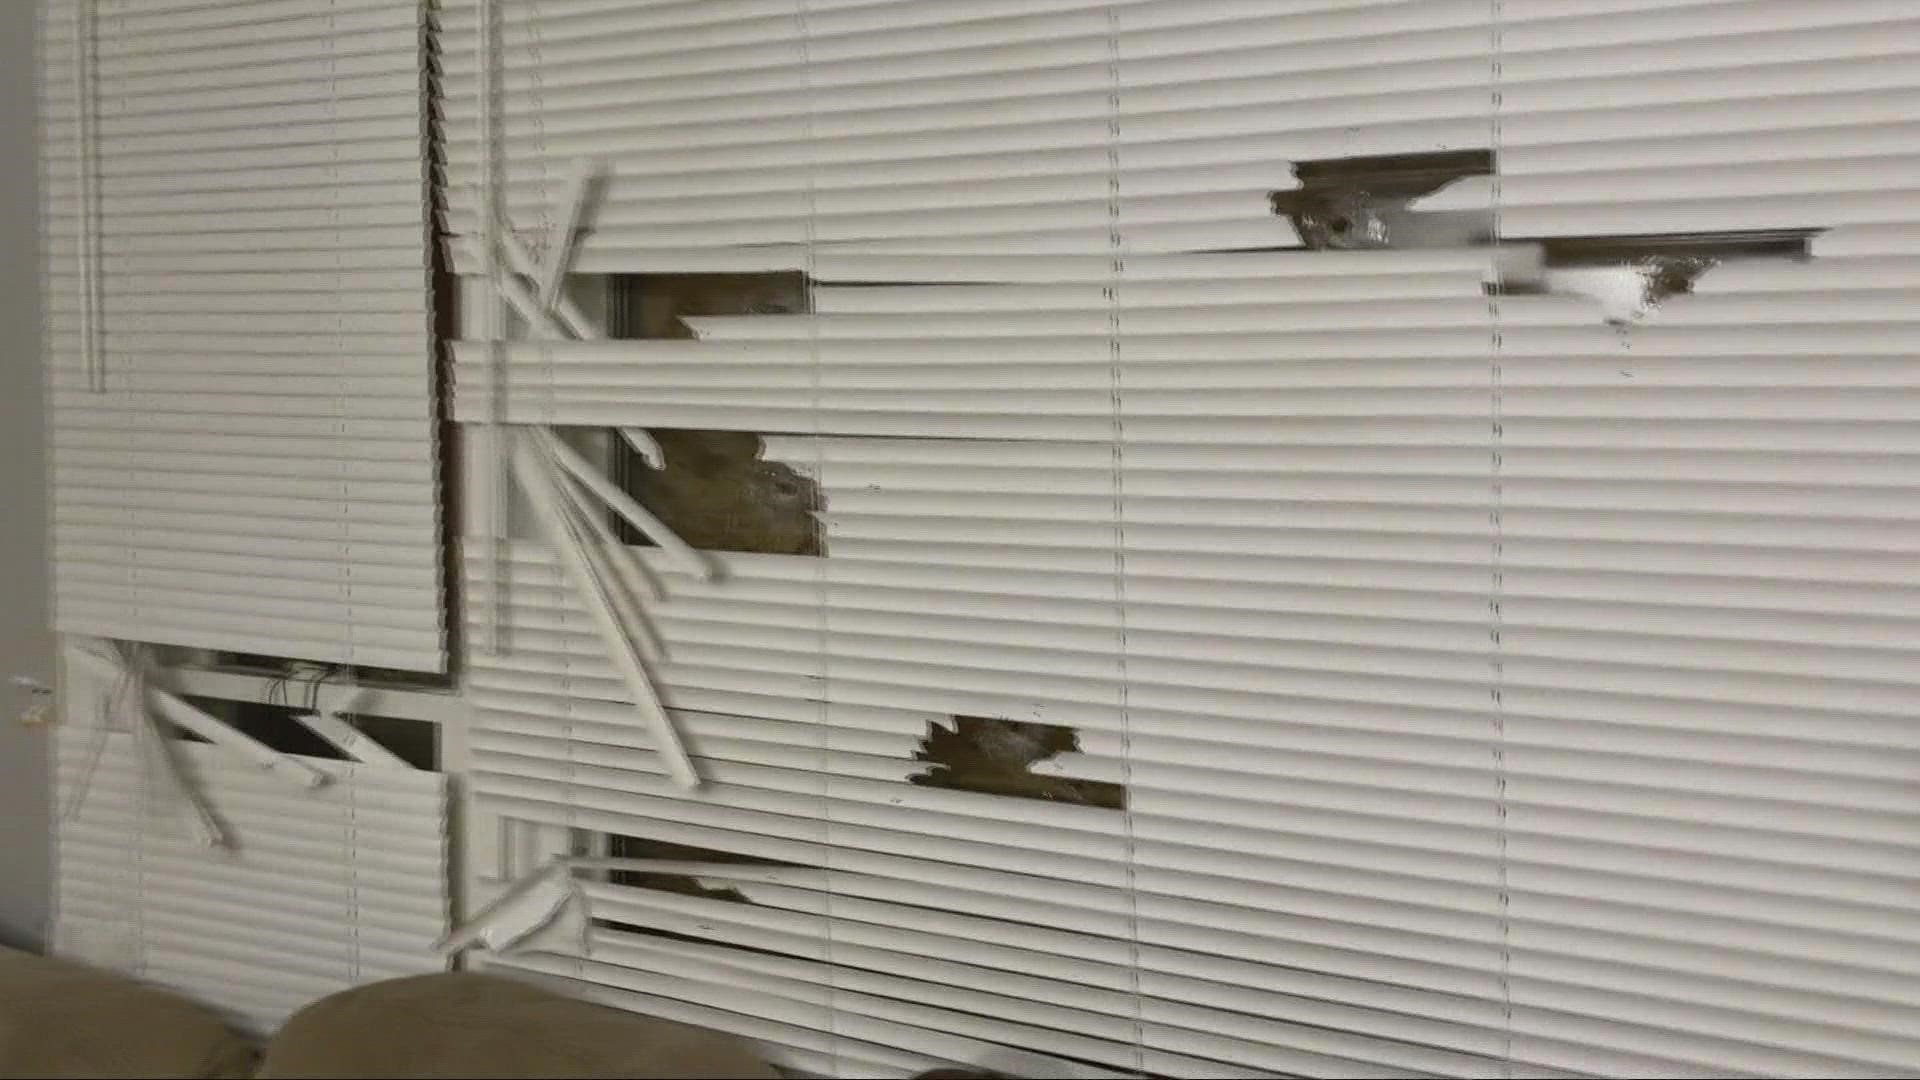 Nearly three dozen shots struck the home following an incident outside. One woman inside was grazed on the foot.